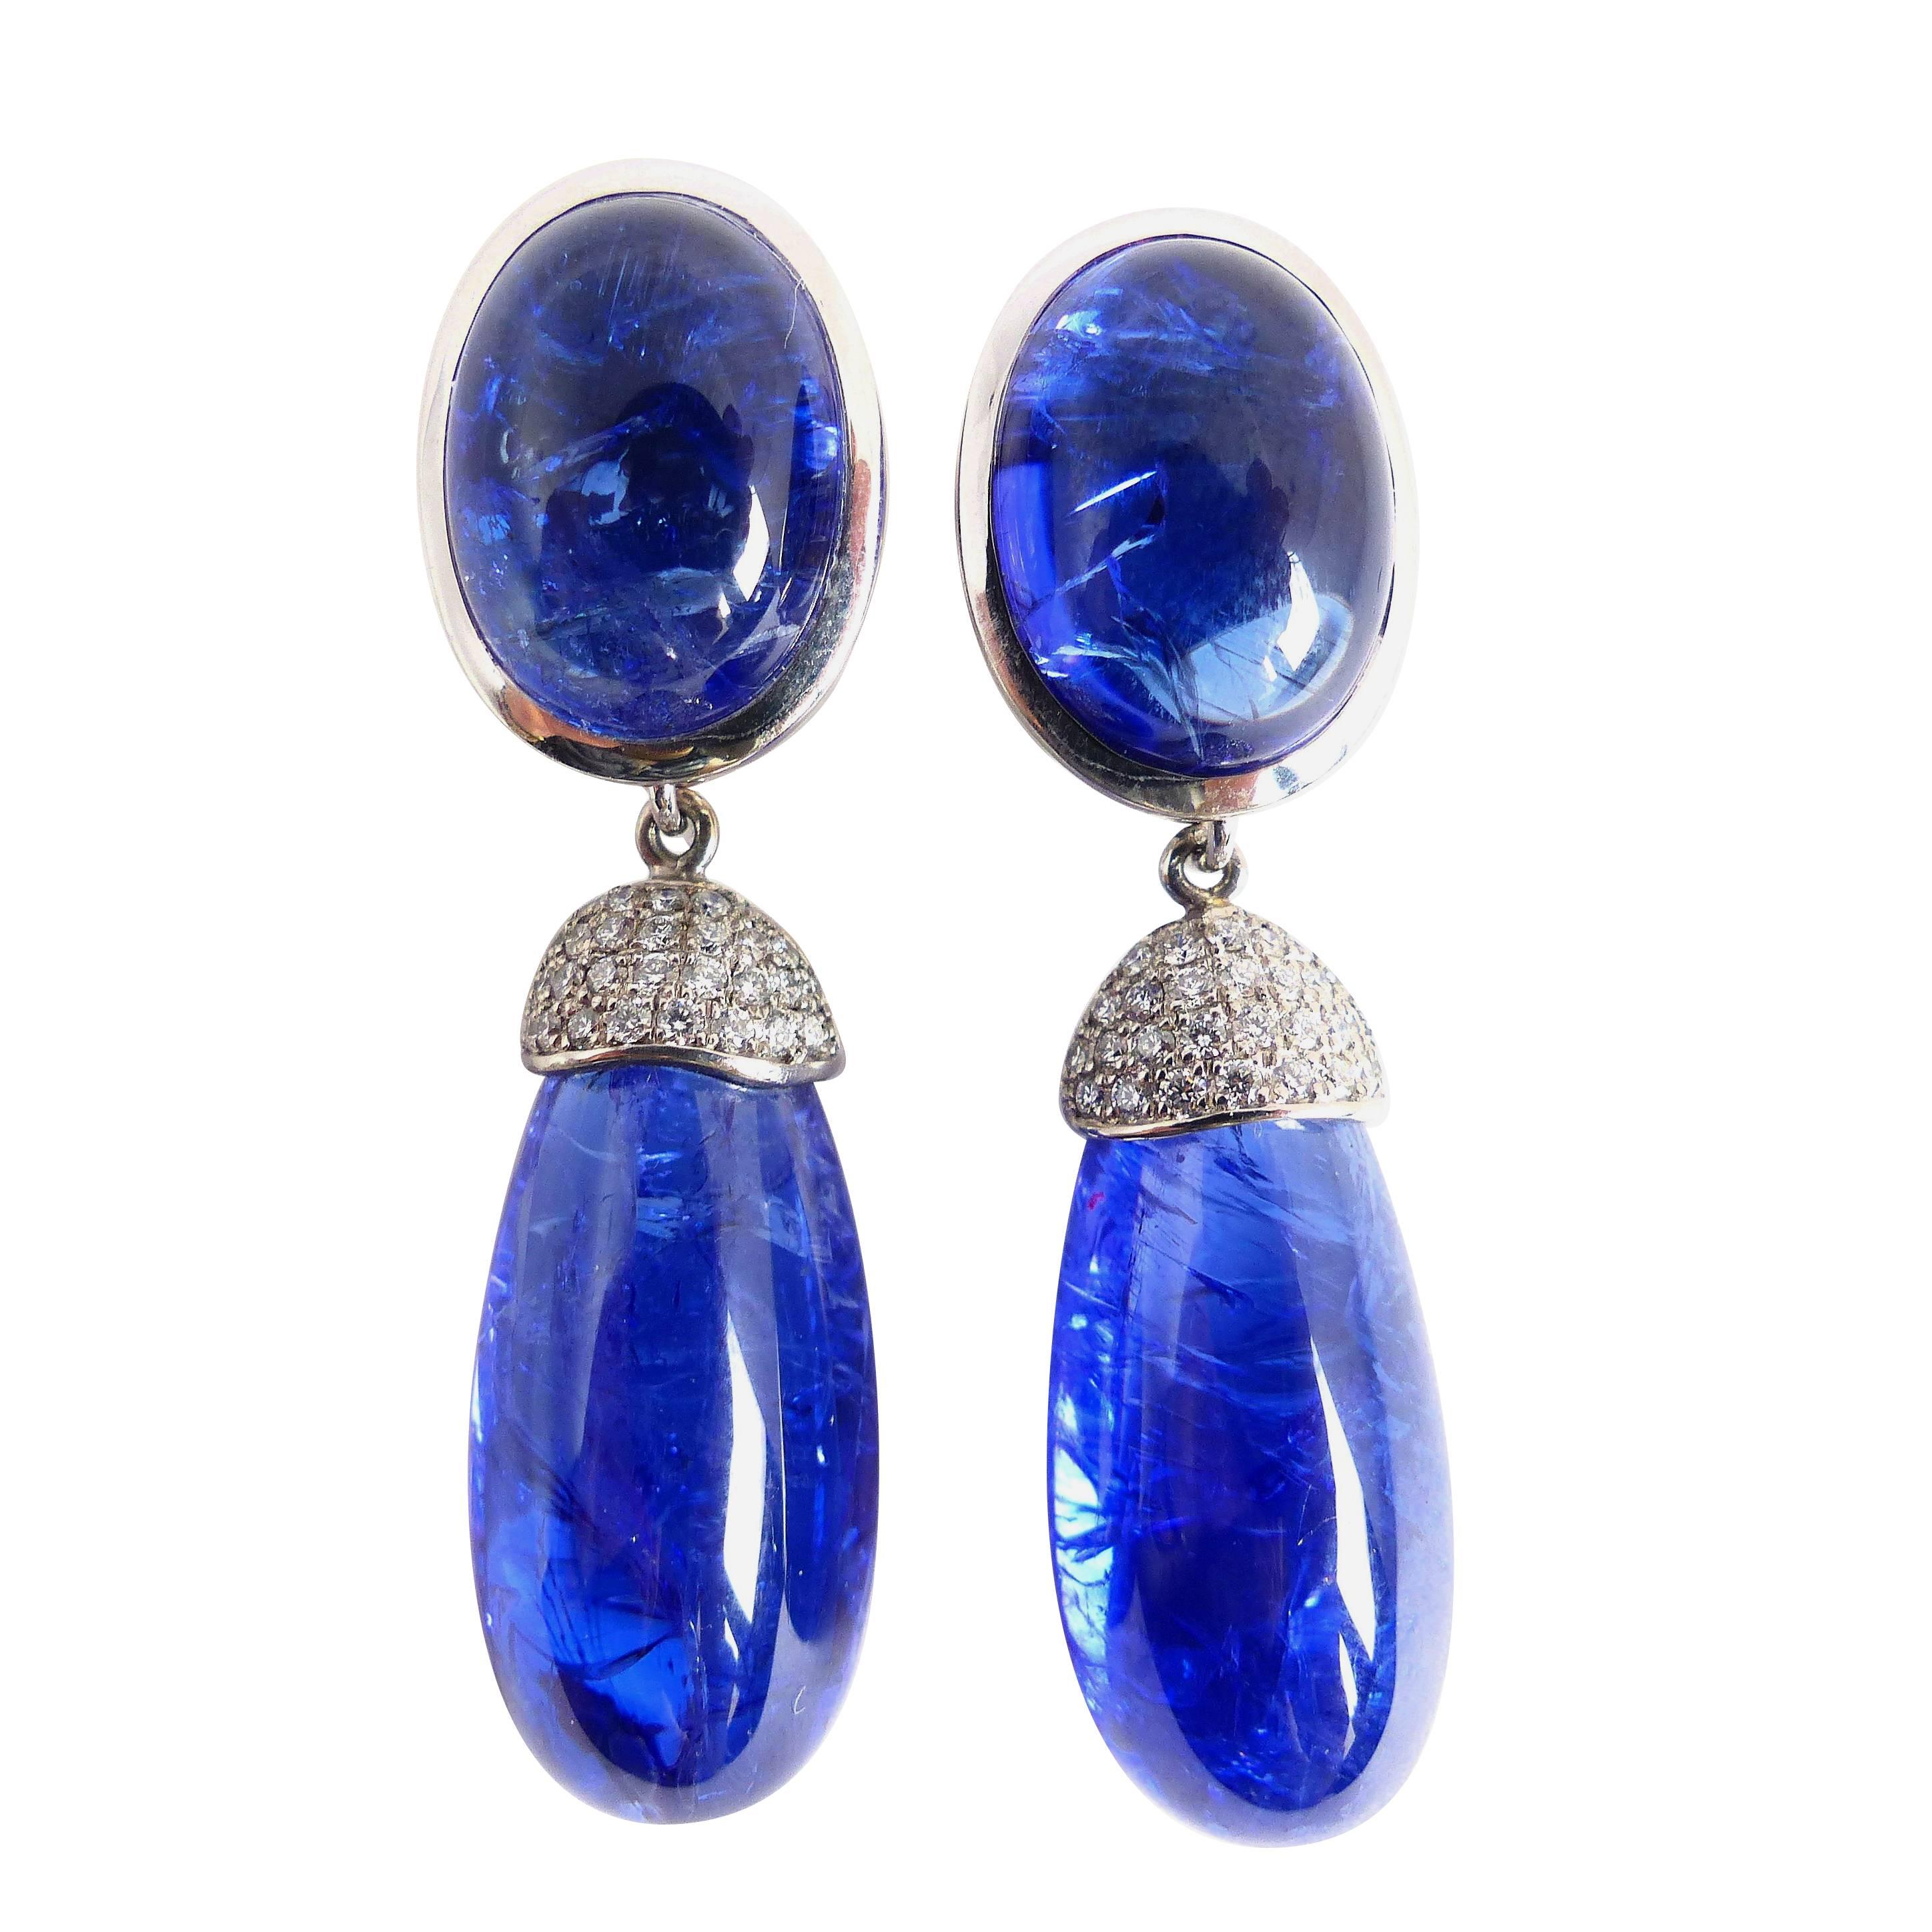 Earrings in White Gold with 4 Tanzanite Cabouchons and Diamonds. For Sale